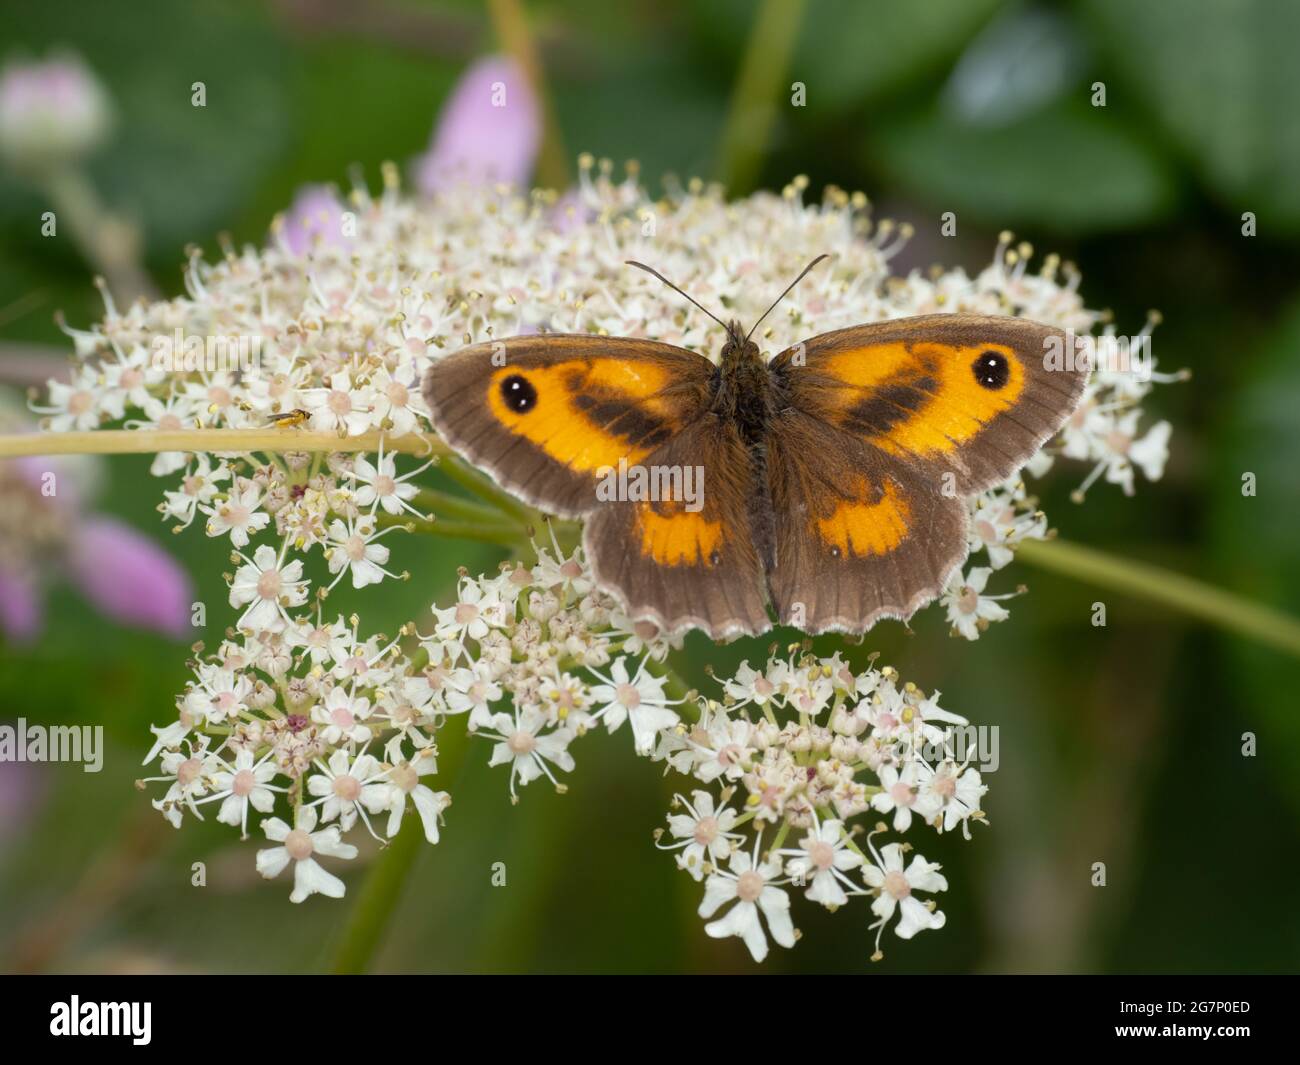 A male Gatekeeper Butterfly also known as the Hedge Brown (Pyronia tithonus), feeding on white flowers. Stock Photo